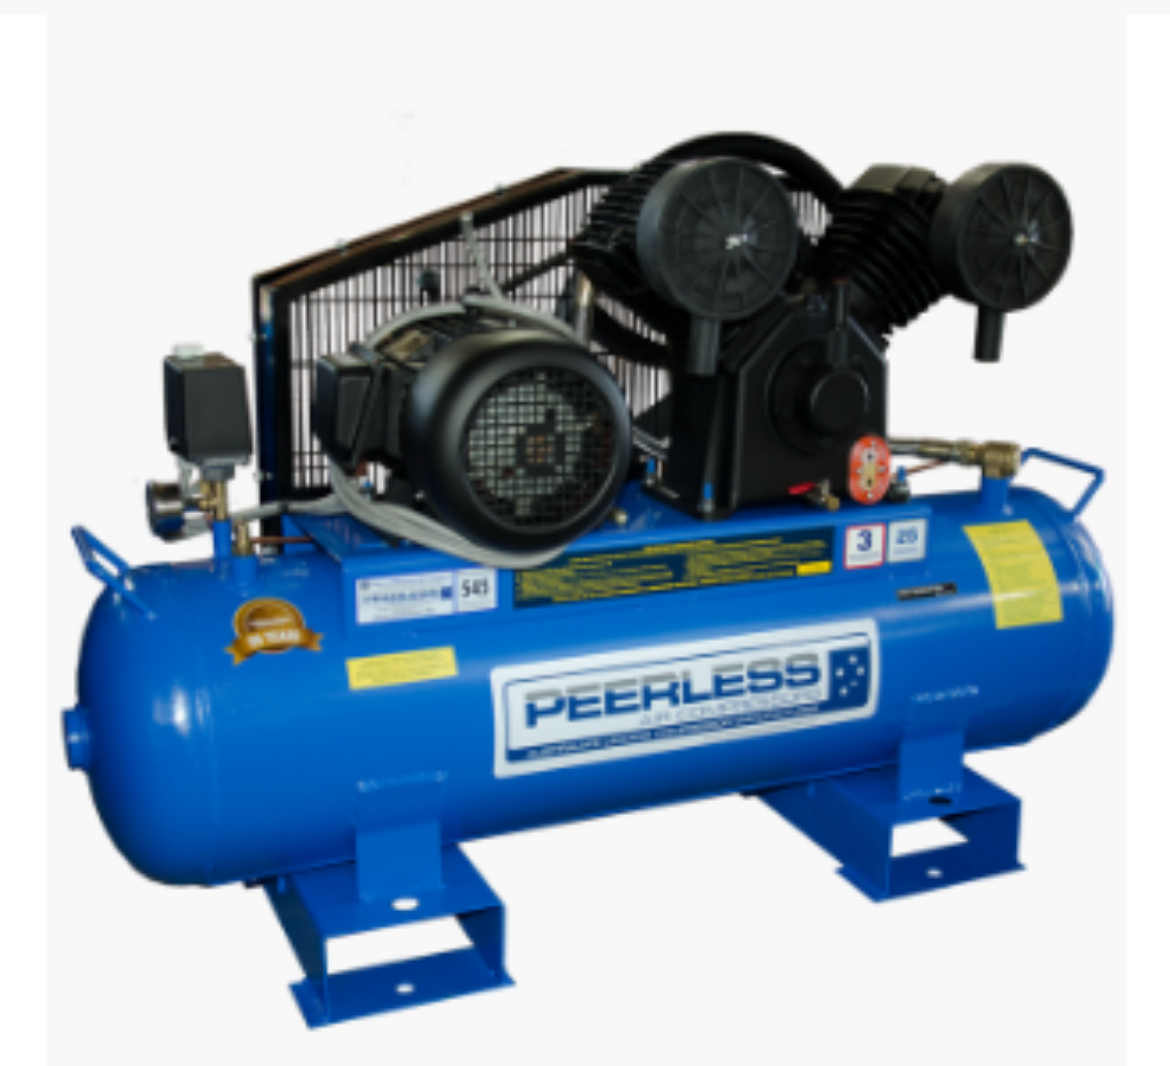 Picture of PEERLESS COMPRESSOR ELECTRIC 5.5HP PV25 Air compressor